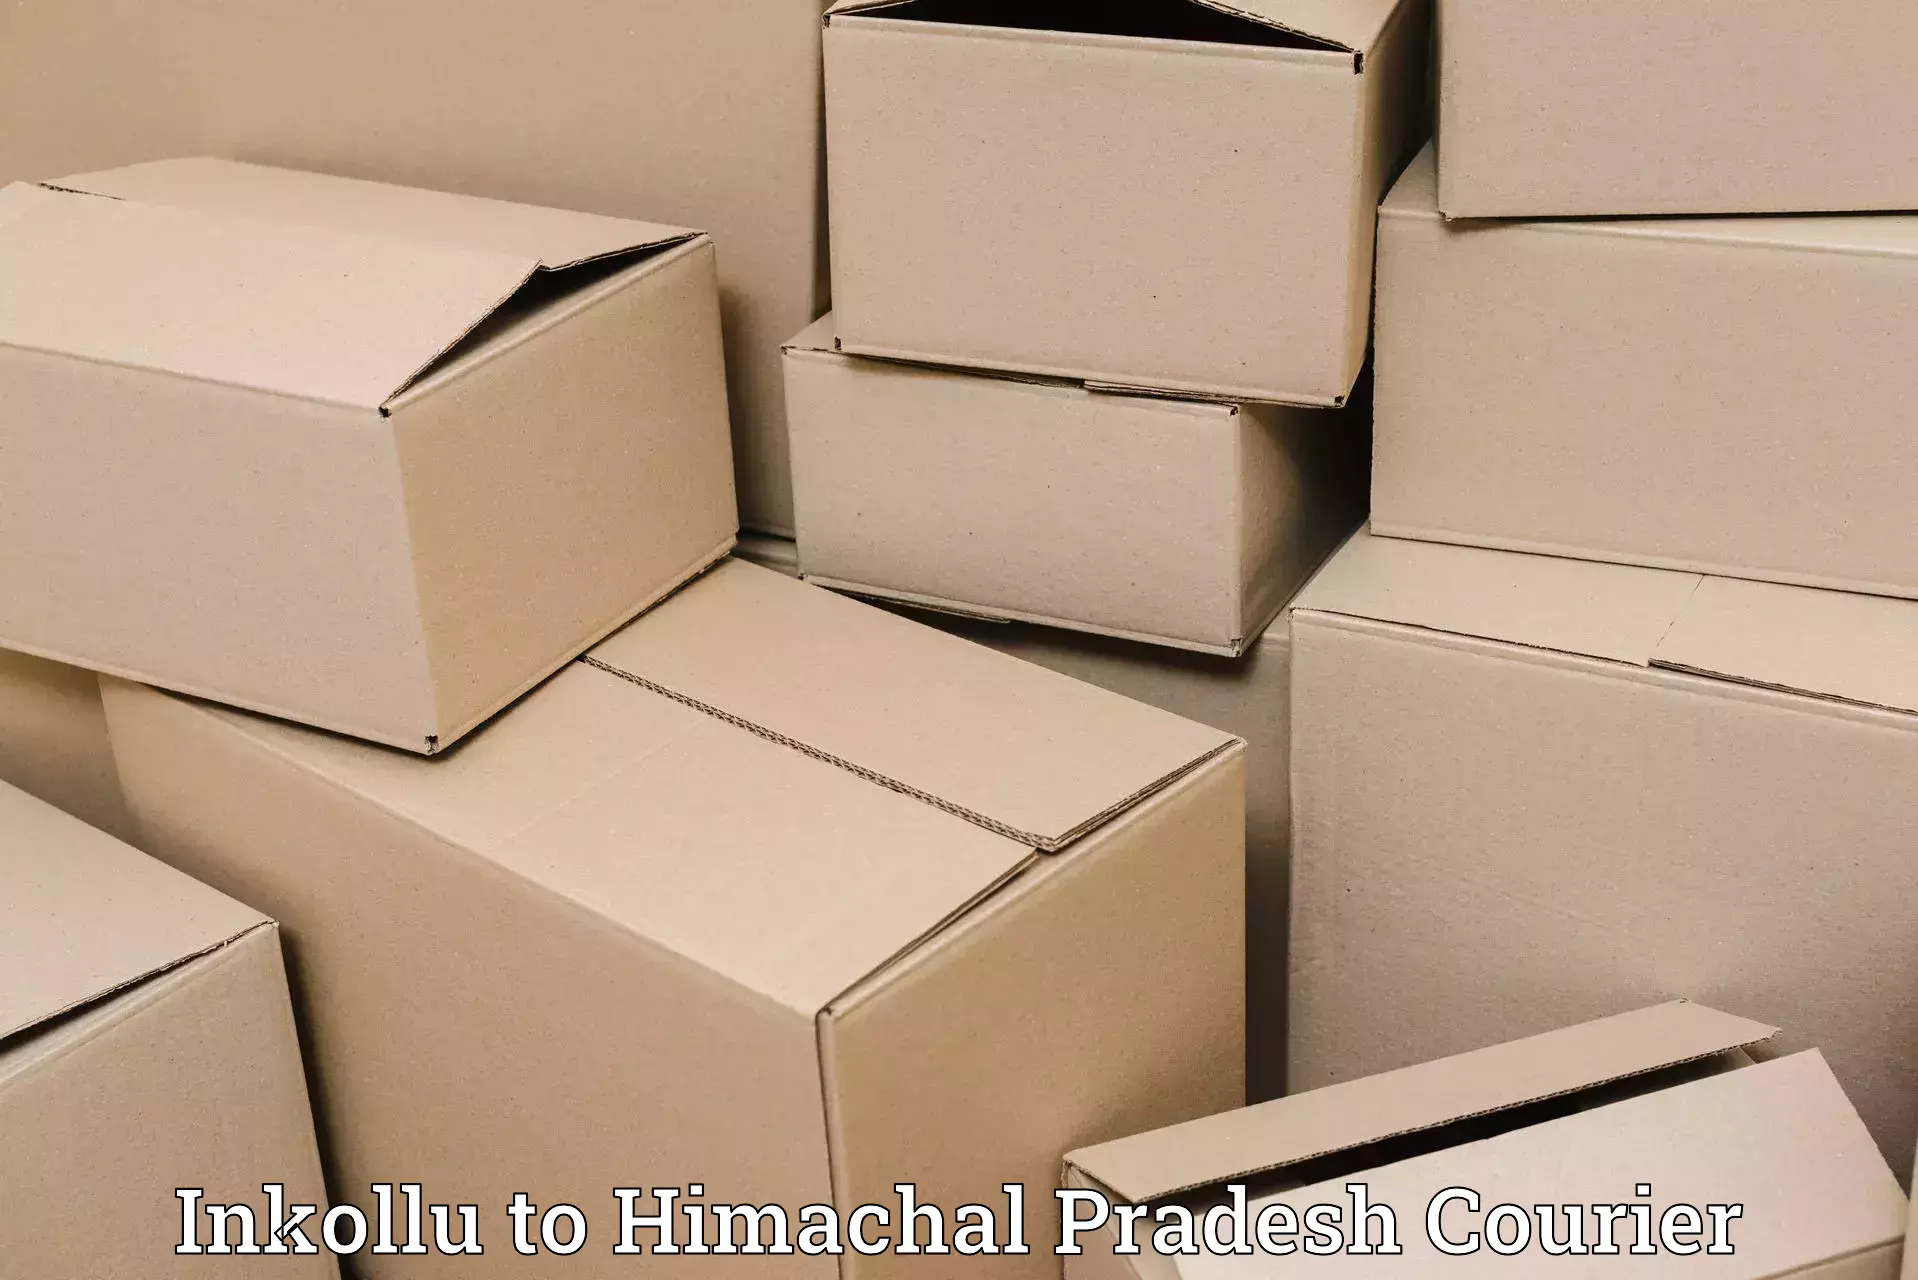 Efficient courier operations in Inkollu to Himachal Pradesh